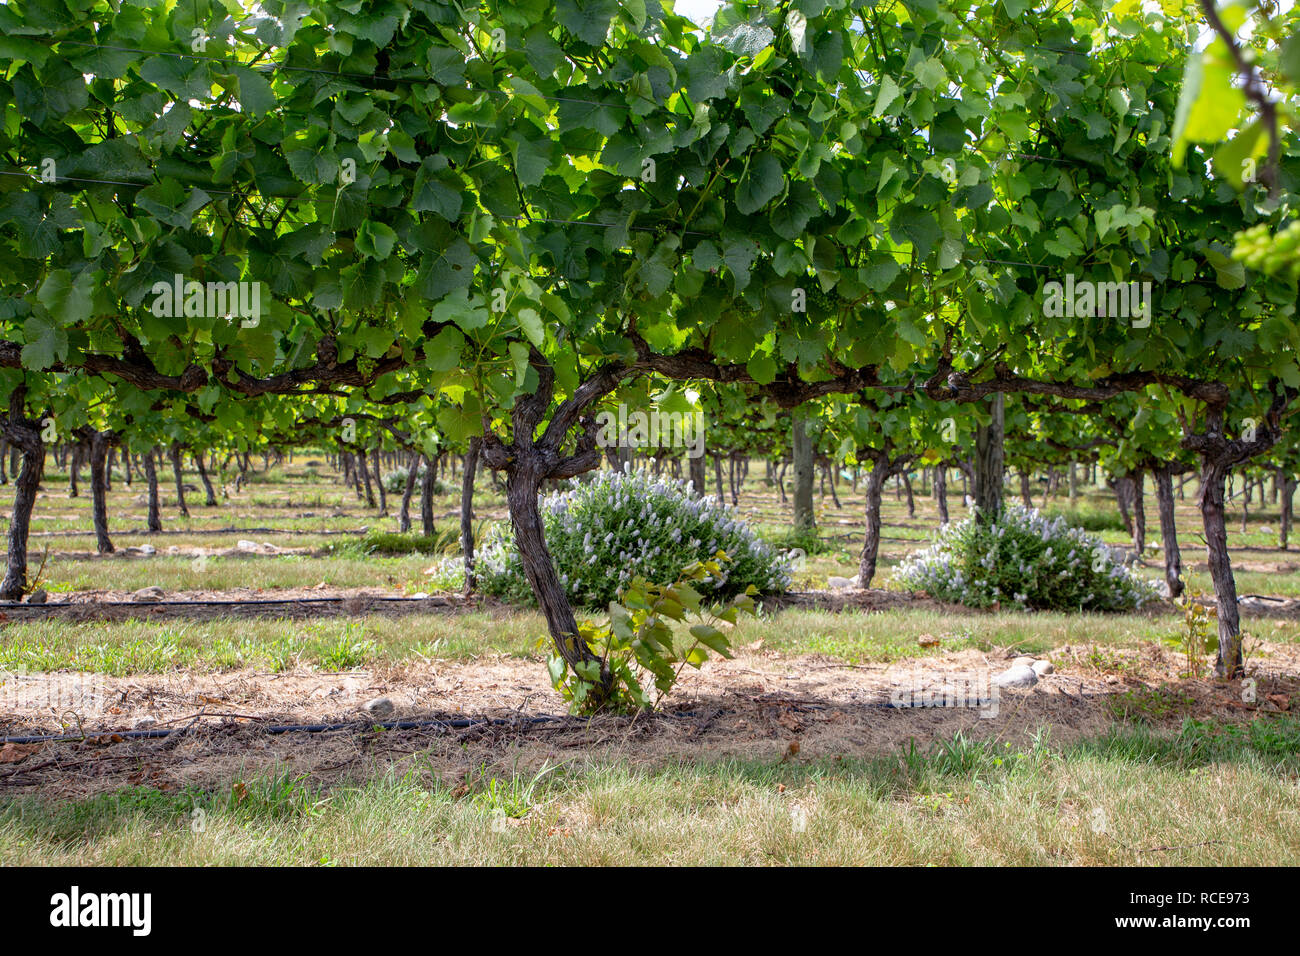 Companion plants growing under grape vine rows attract bees and beneficial insects Stock Photo